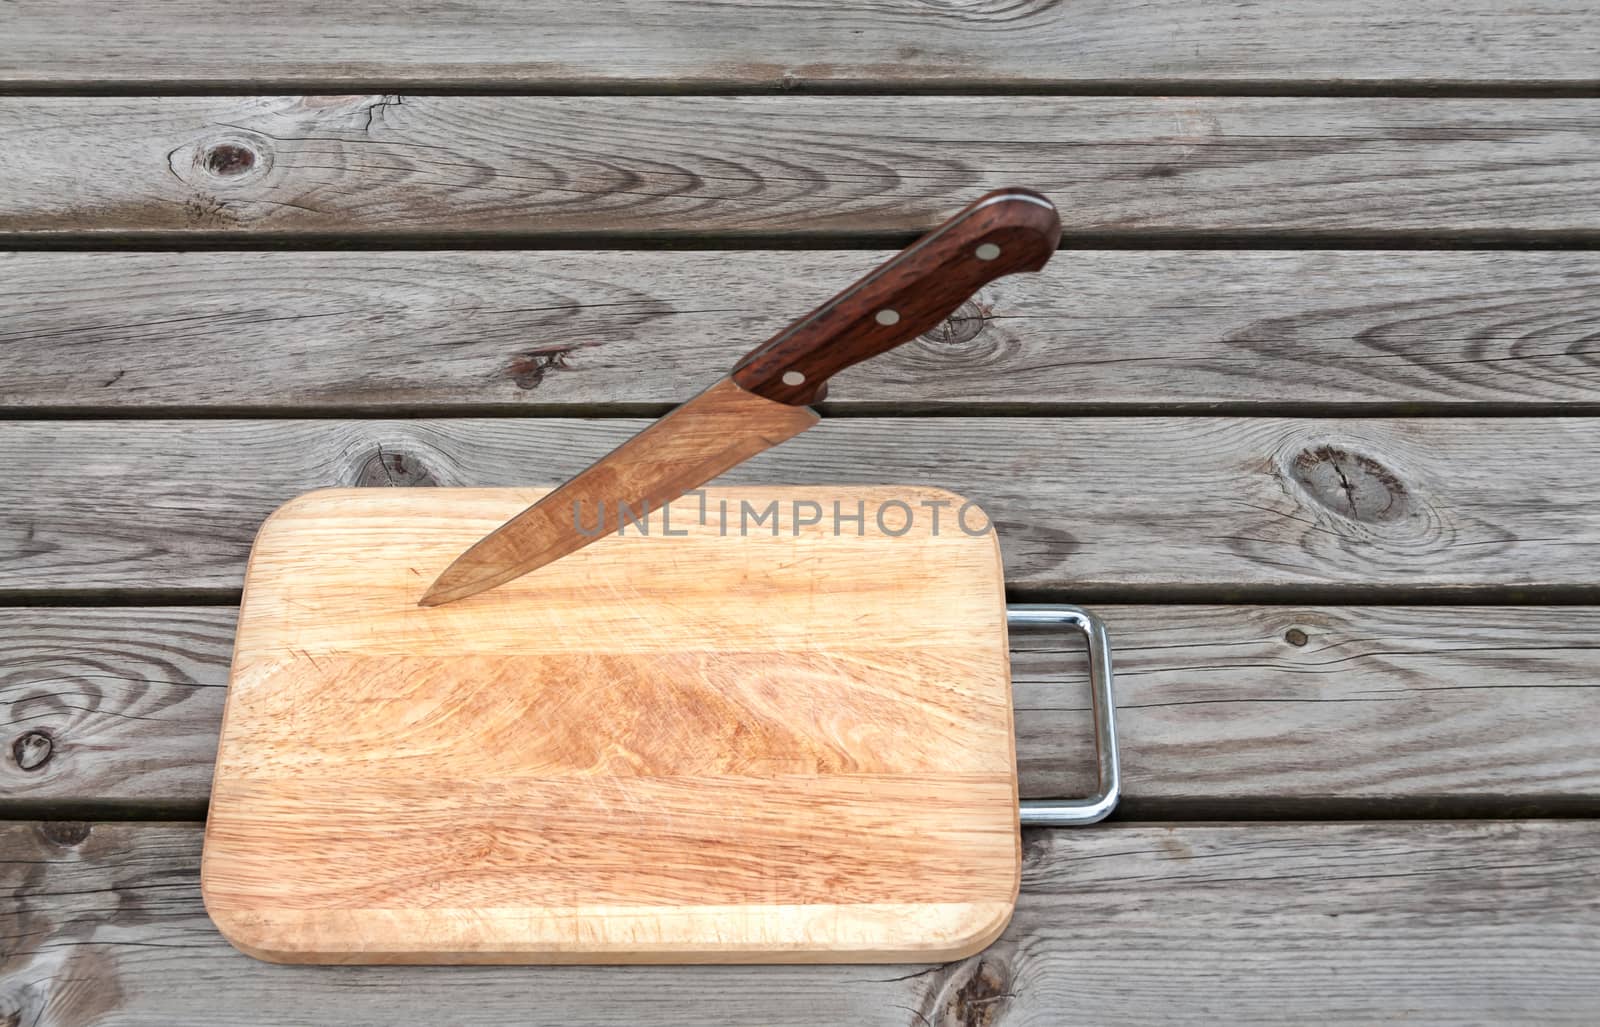 Steel knife and cutting board on a wooden table